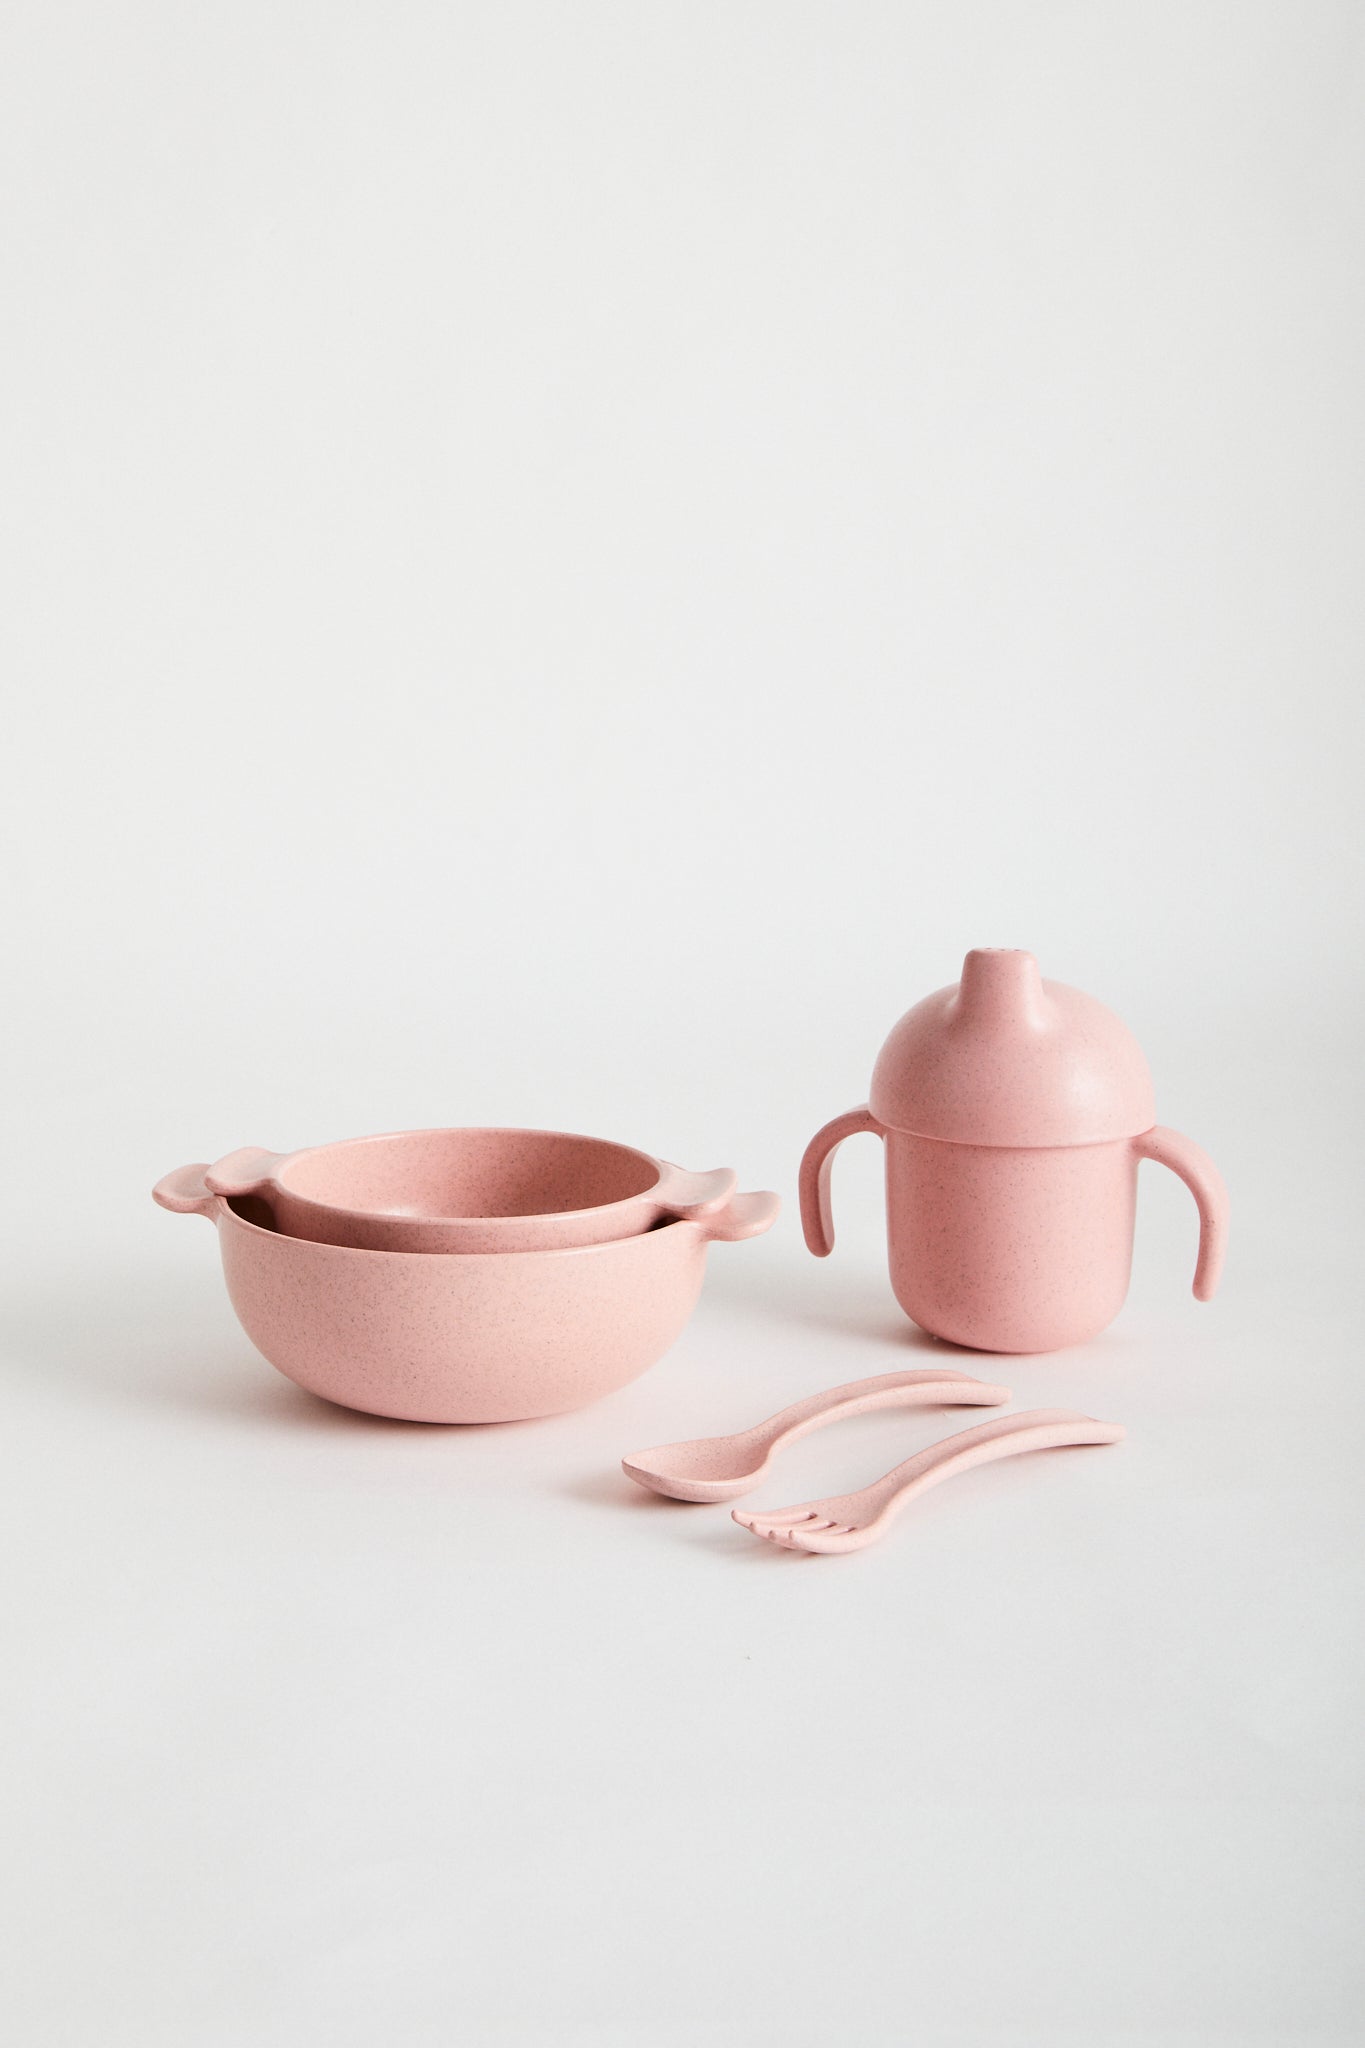 Wheat straw dinnerware set in Rose, -Set contains: sippy cup, large bowl, small bowl, spoon & fork